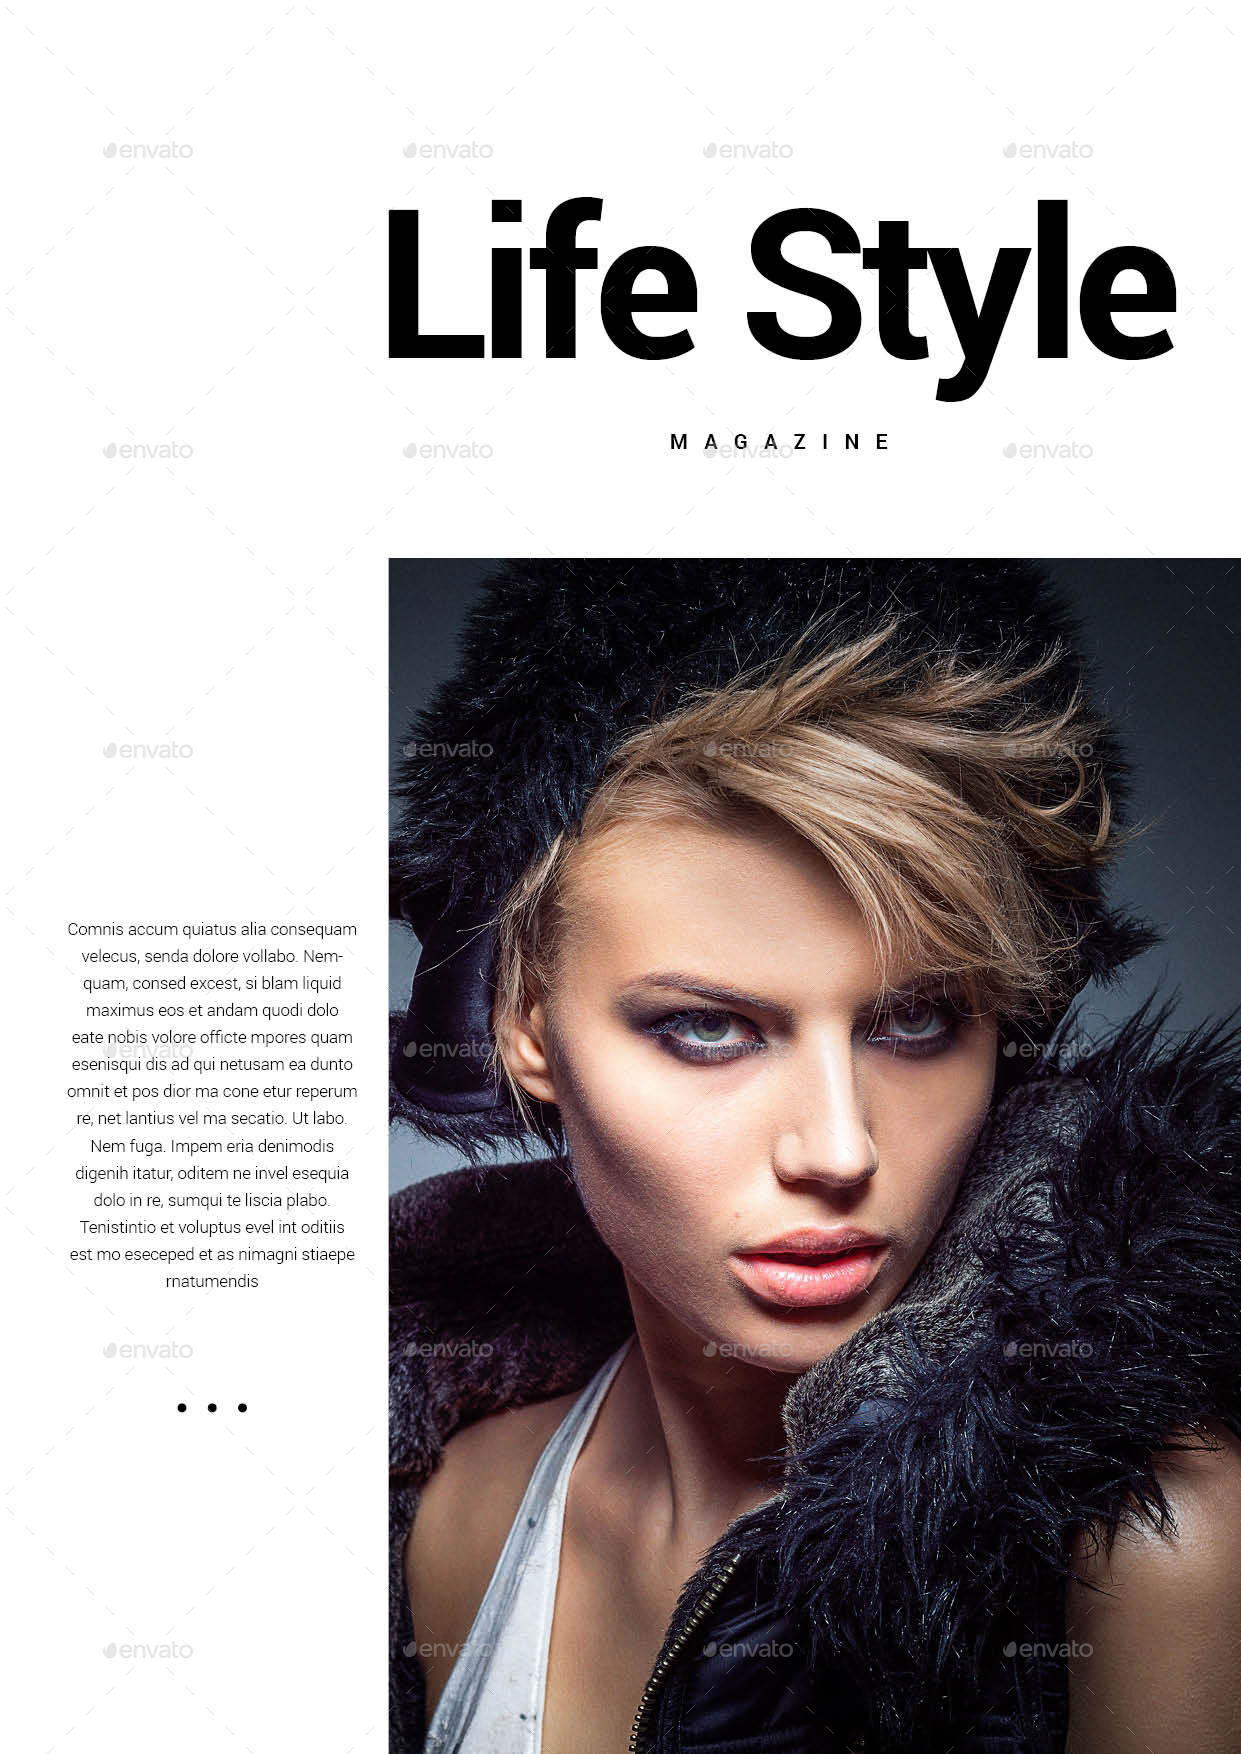 Life Style Magazine Template by Luckascode | GraphicRiver